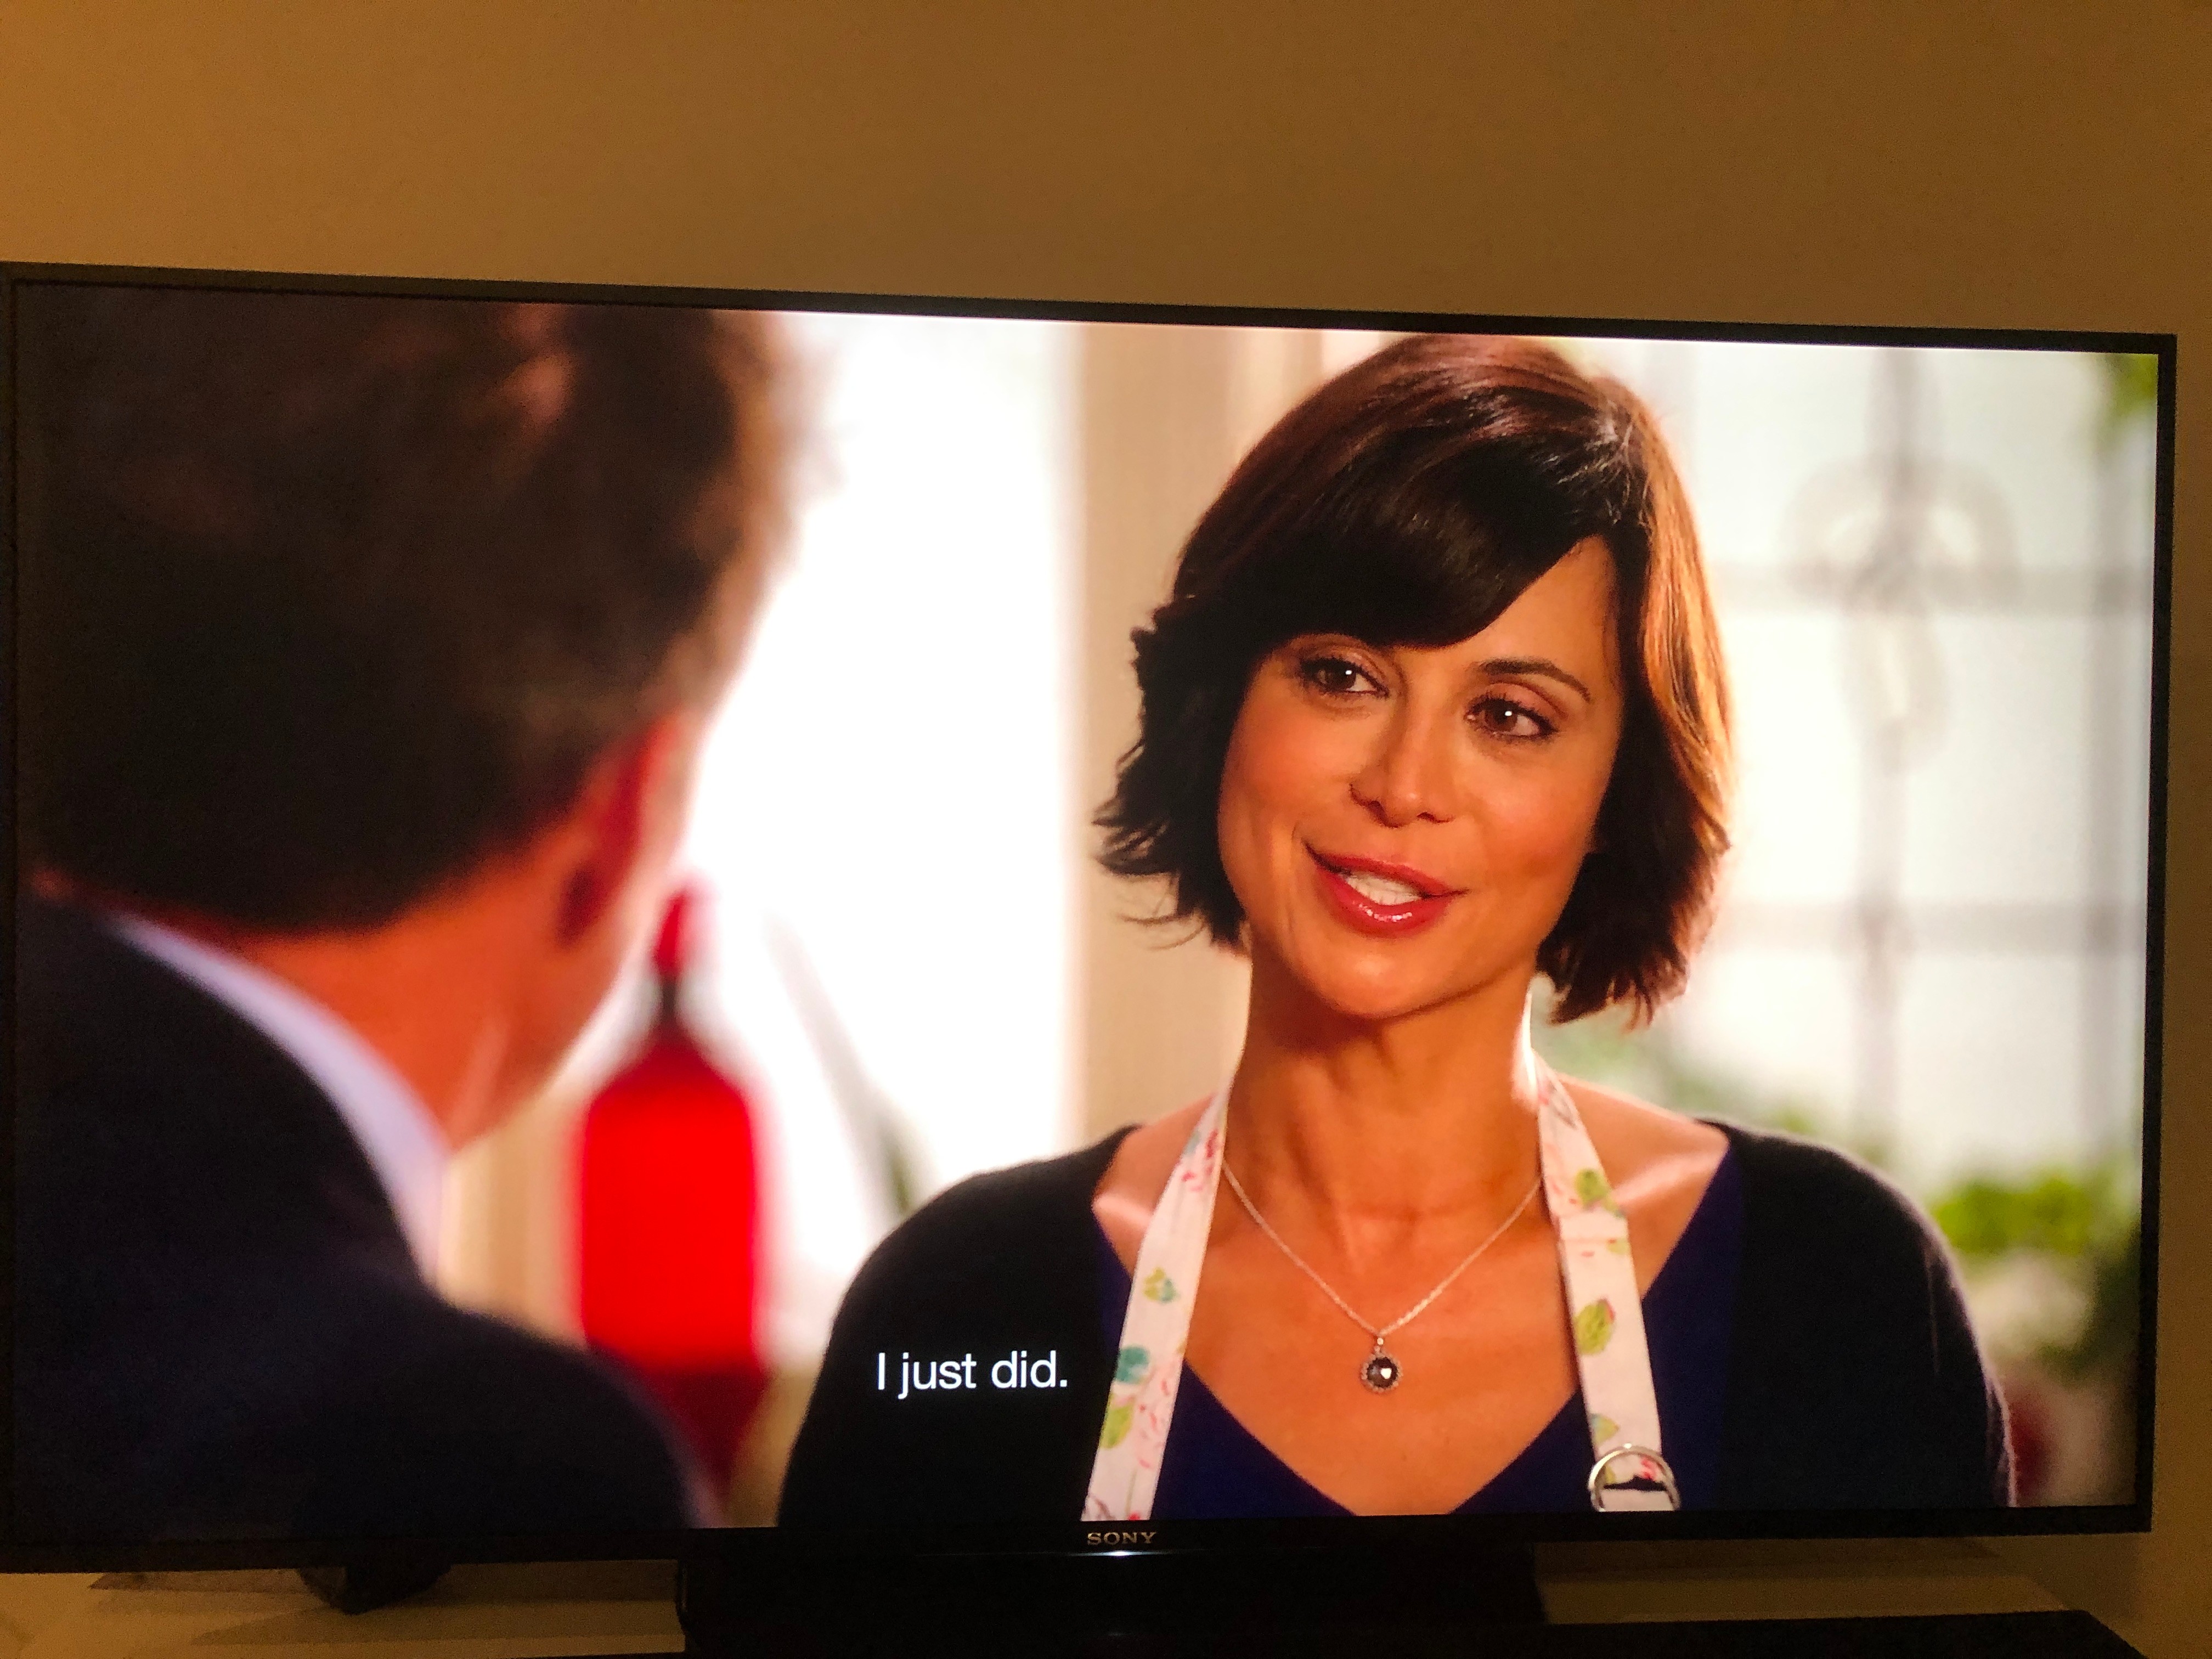 Subtitle size can't be changed in tv… - Apple Community